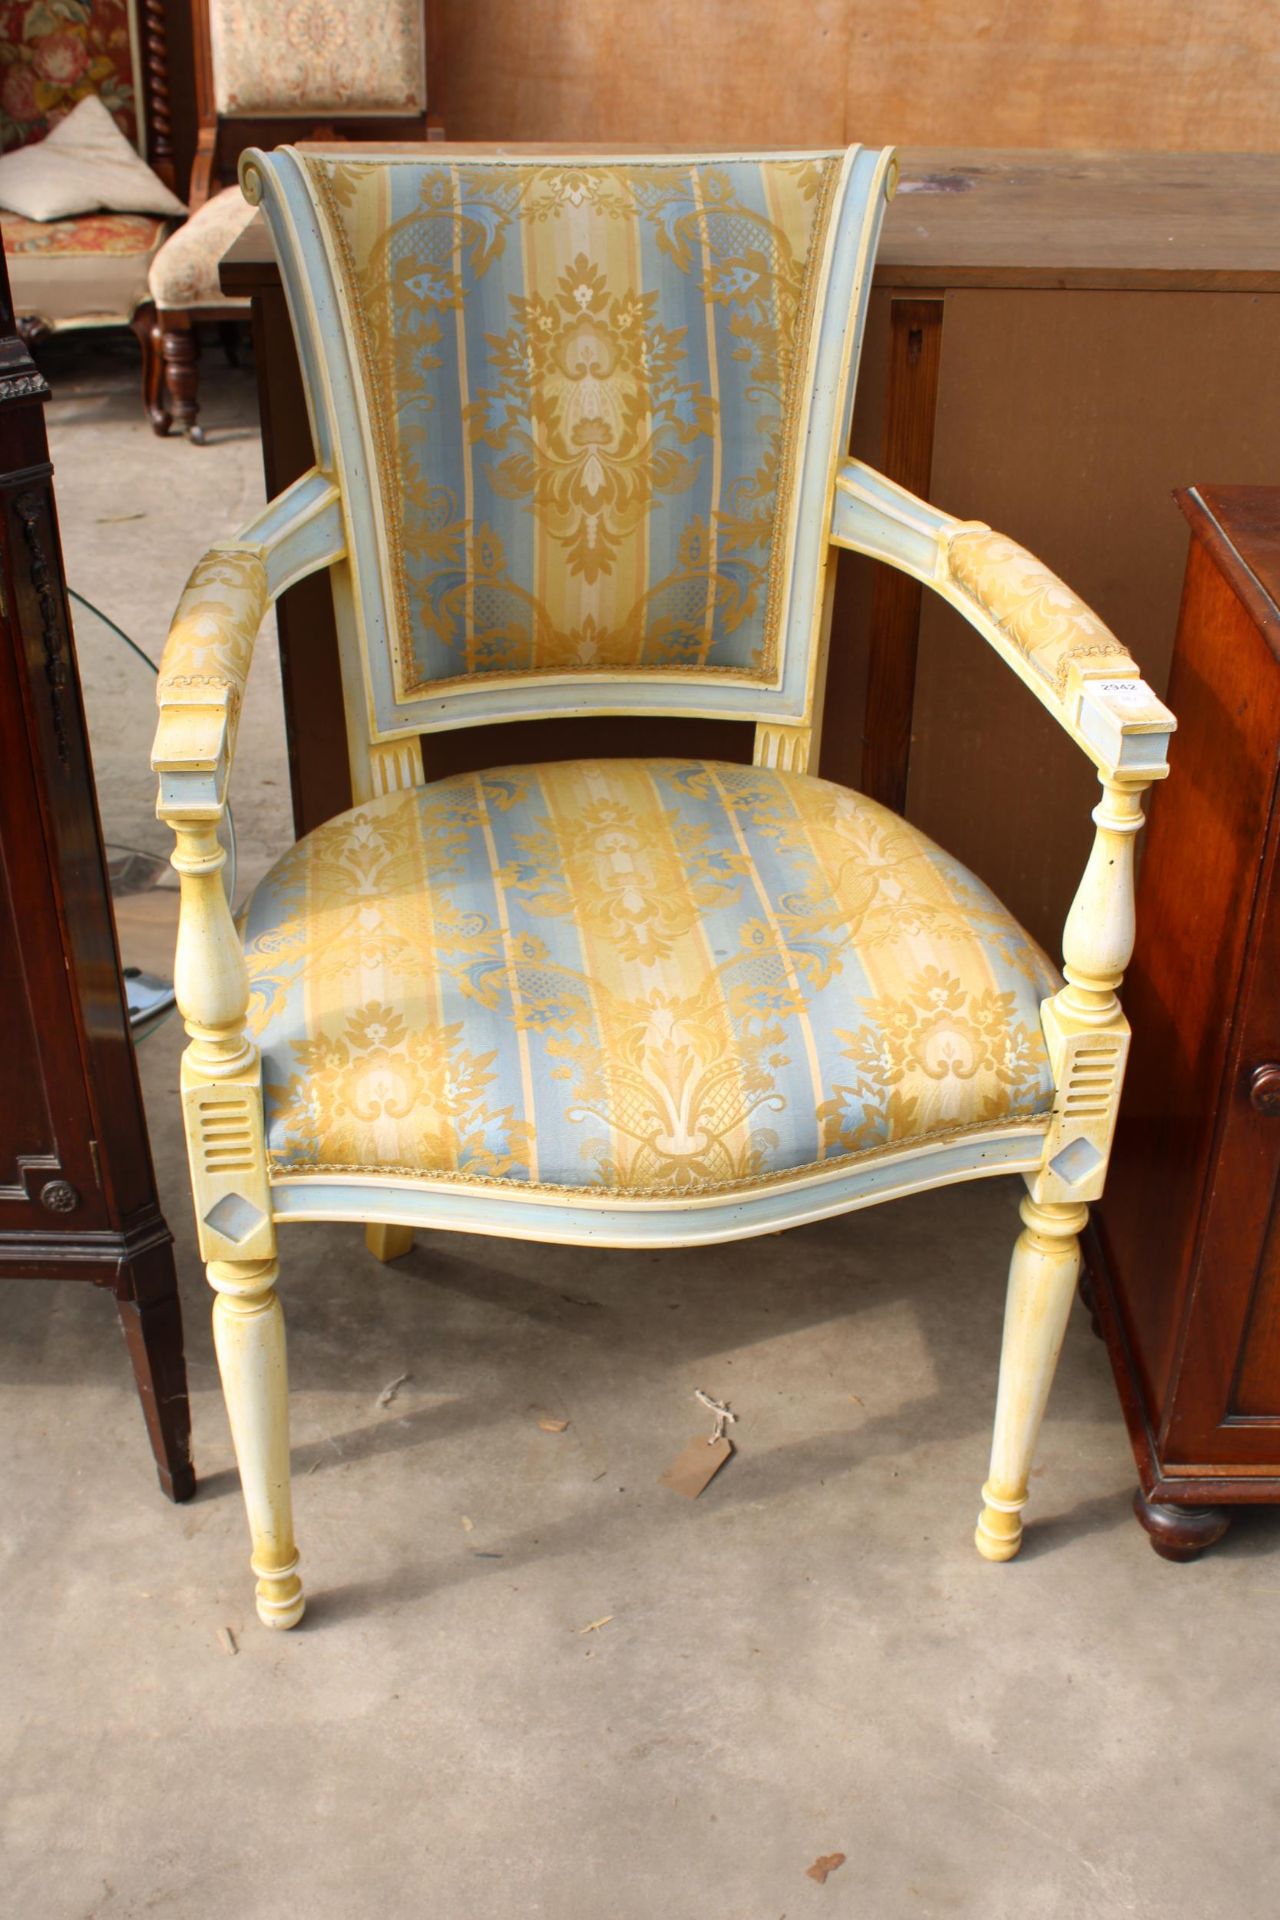 A CONTINETAL 19TH CENTURY STYLE OPEN ARMCHAIR WITH TURNED LEGS AND UPRIGHTS